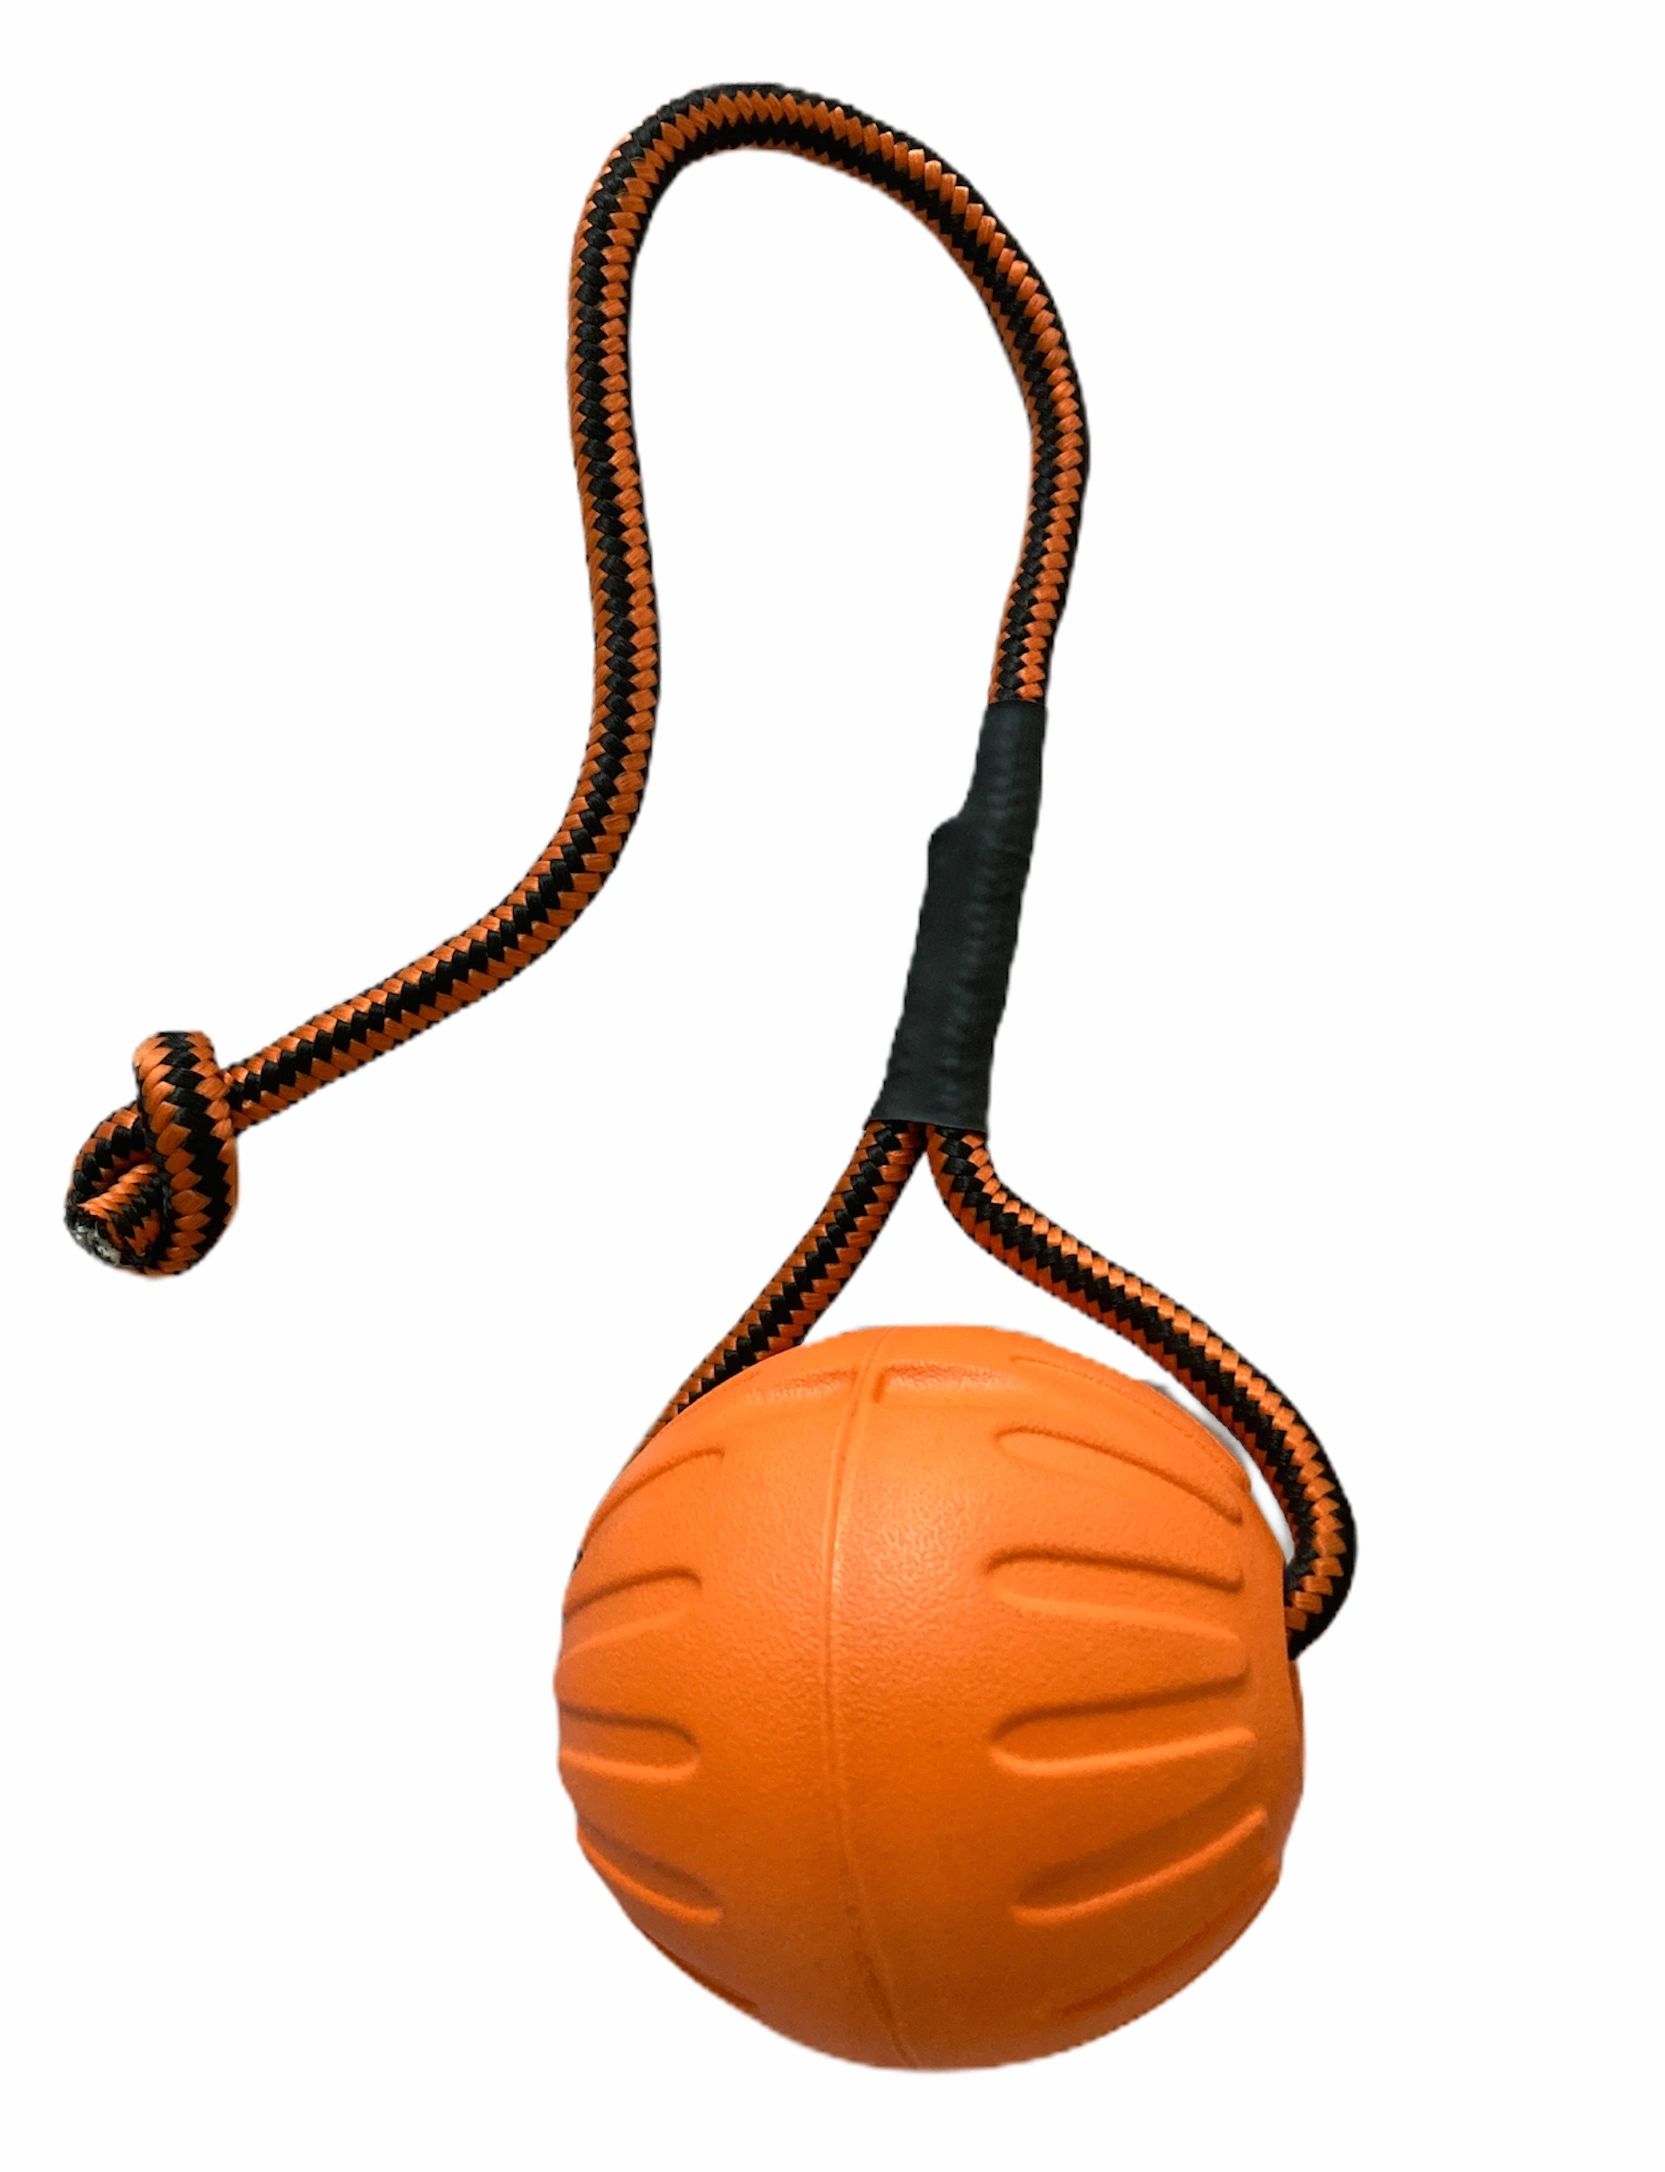 Indestructible Ball On A Rope